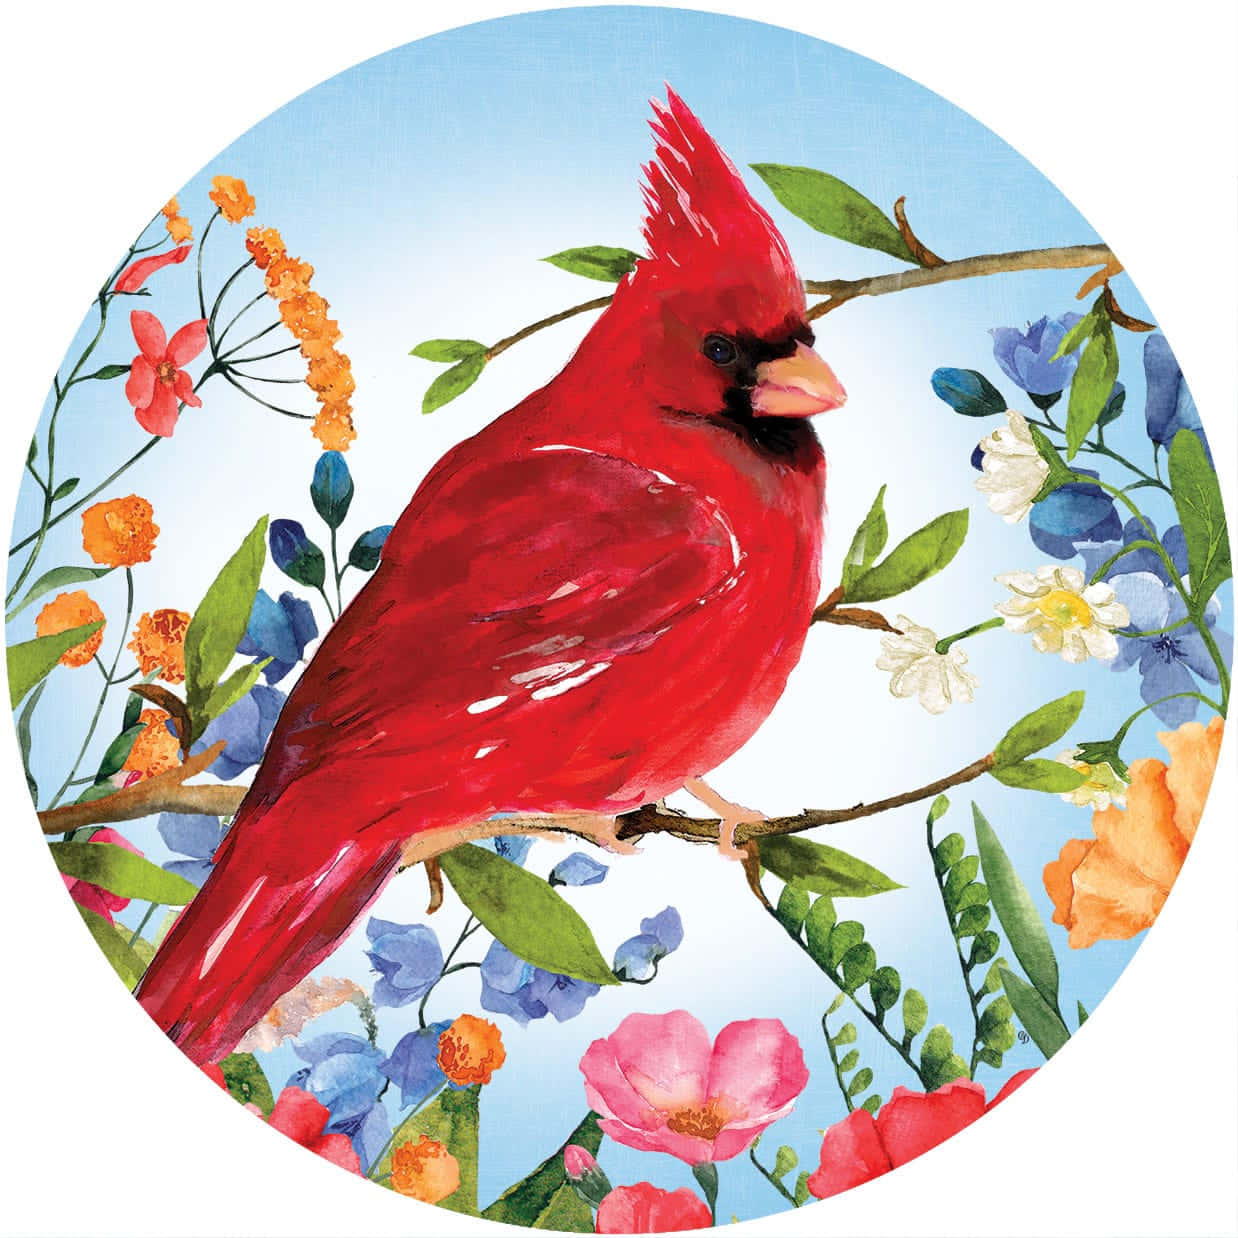 "The beauty of the cardinal captivates all viewers"